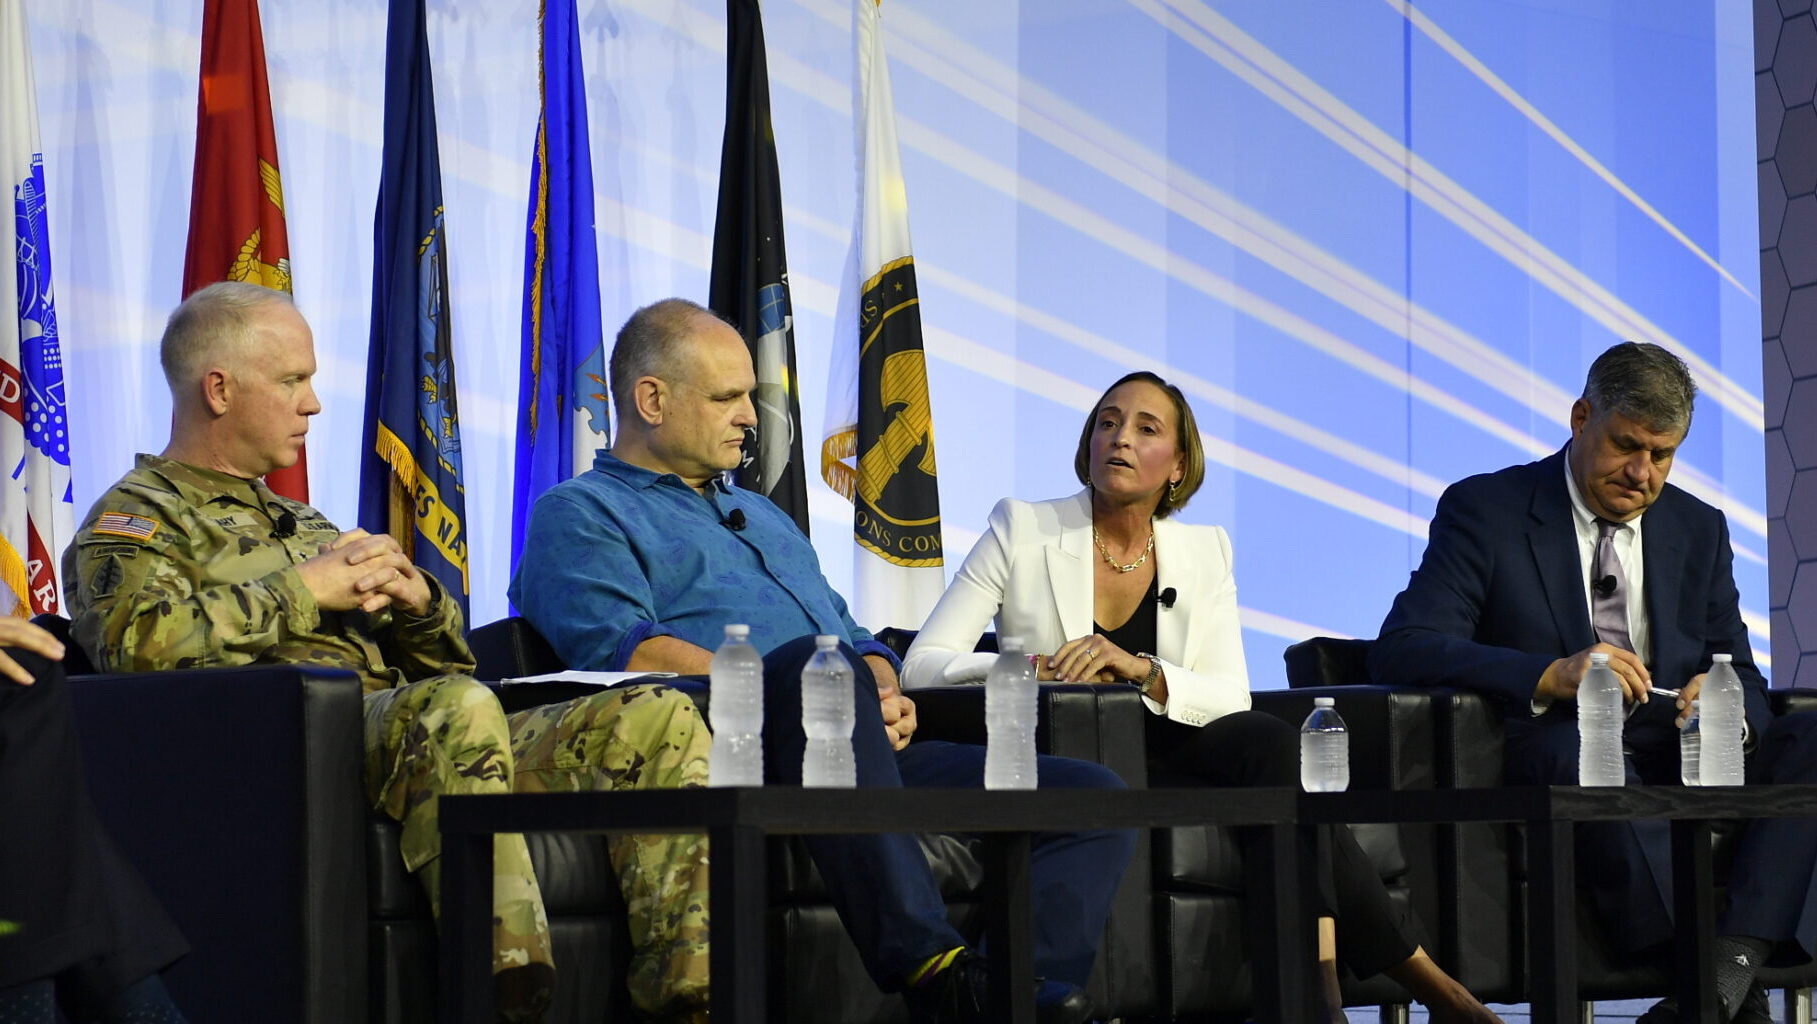 Mirroring DoD’s interest, GDIT chief says it’s upping investment in digital engineering